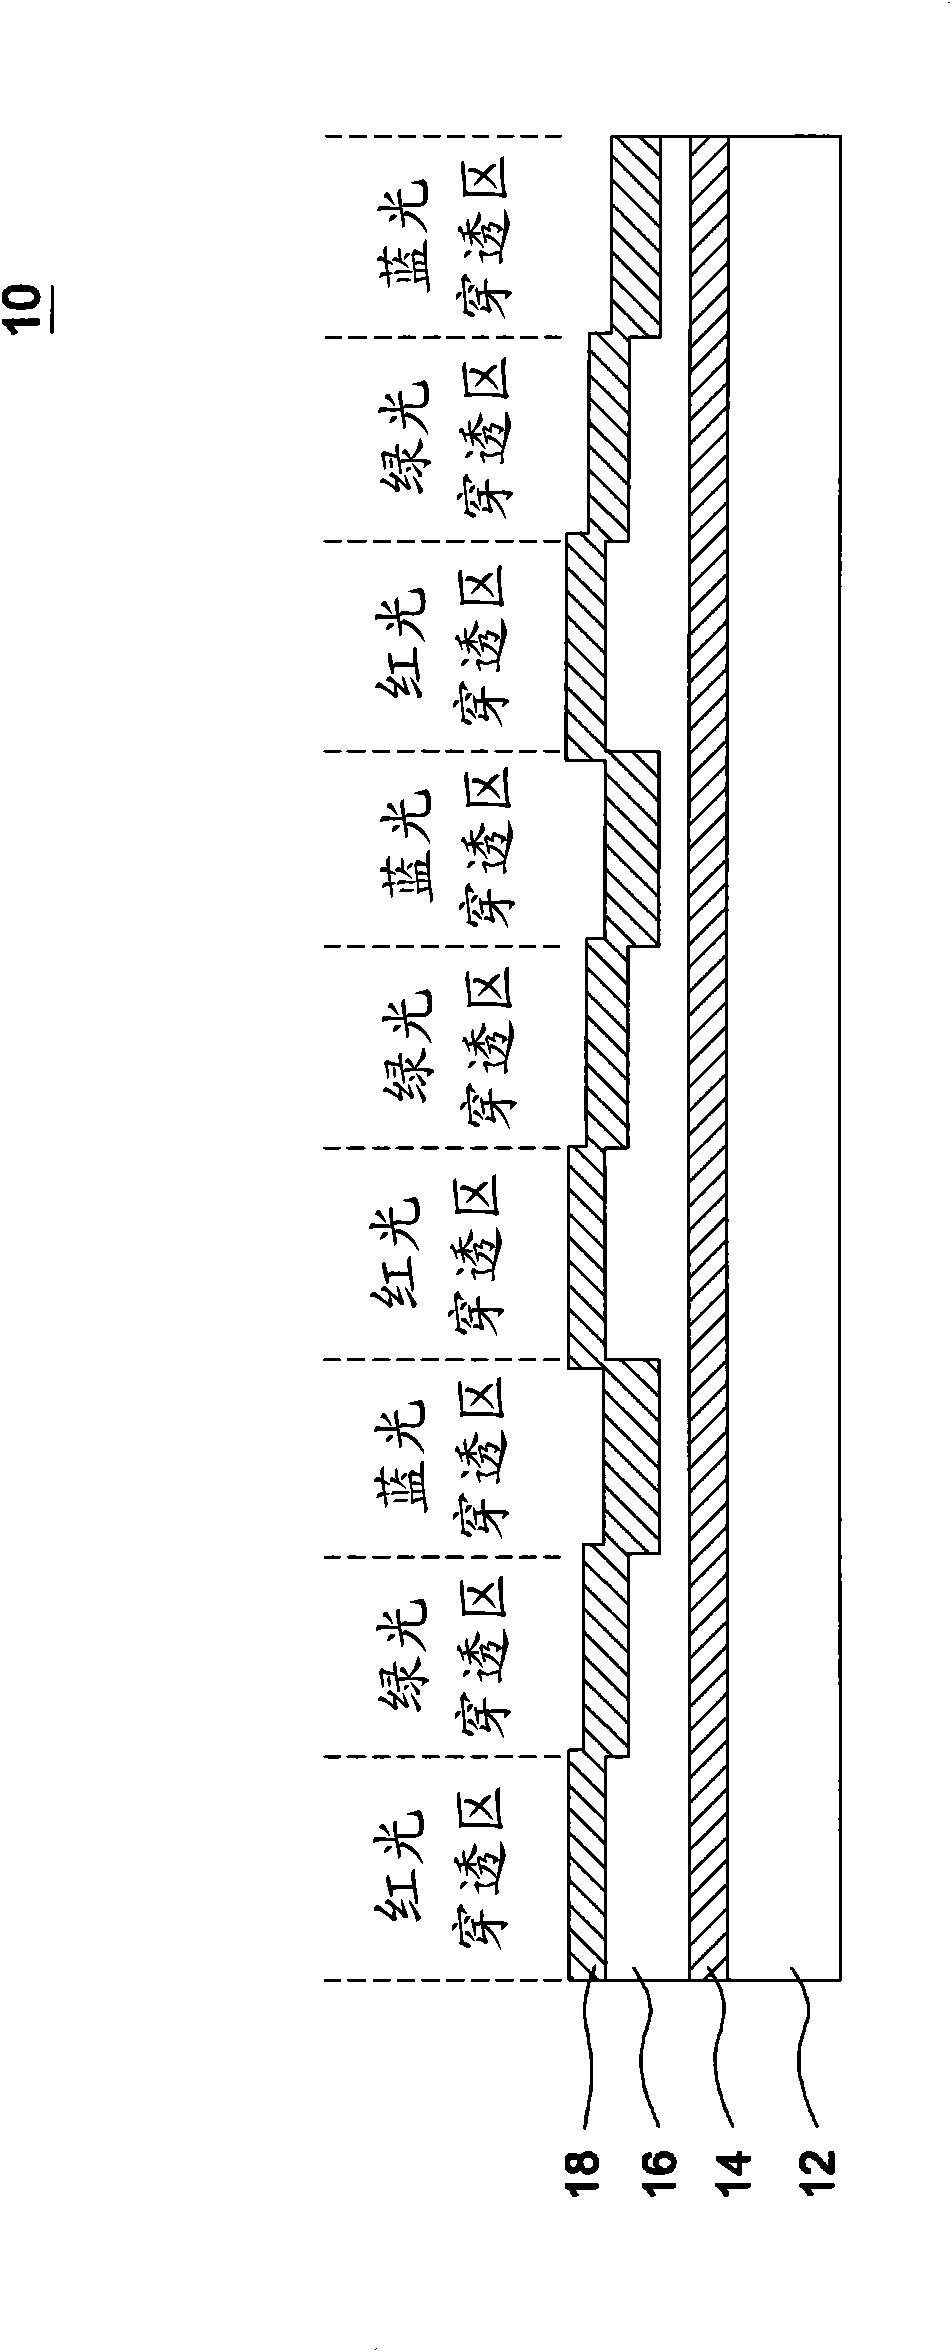 Colorful filter with touch function and liquid crystal display device